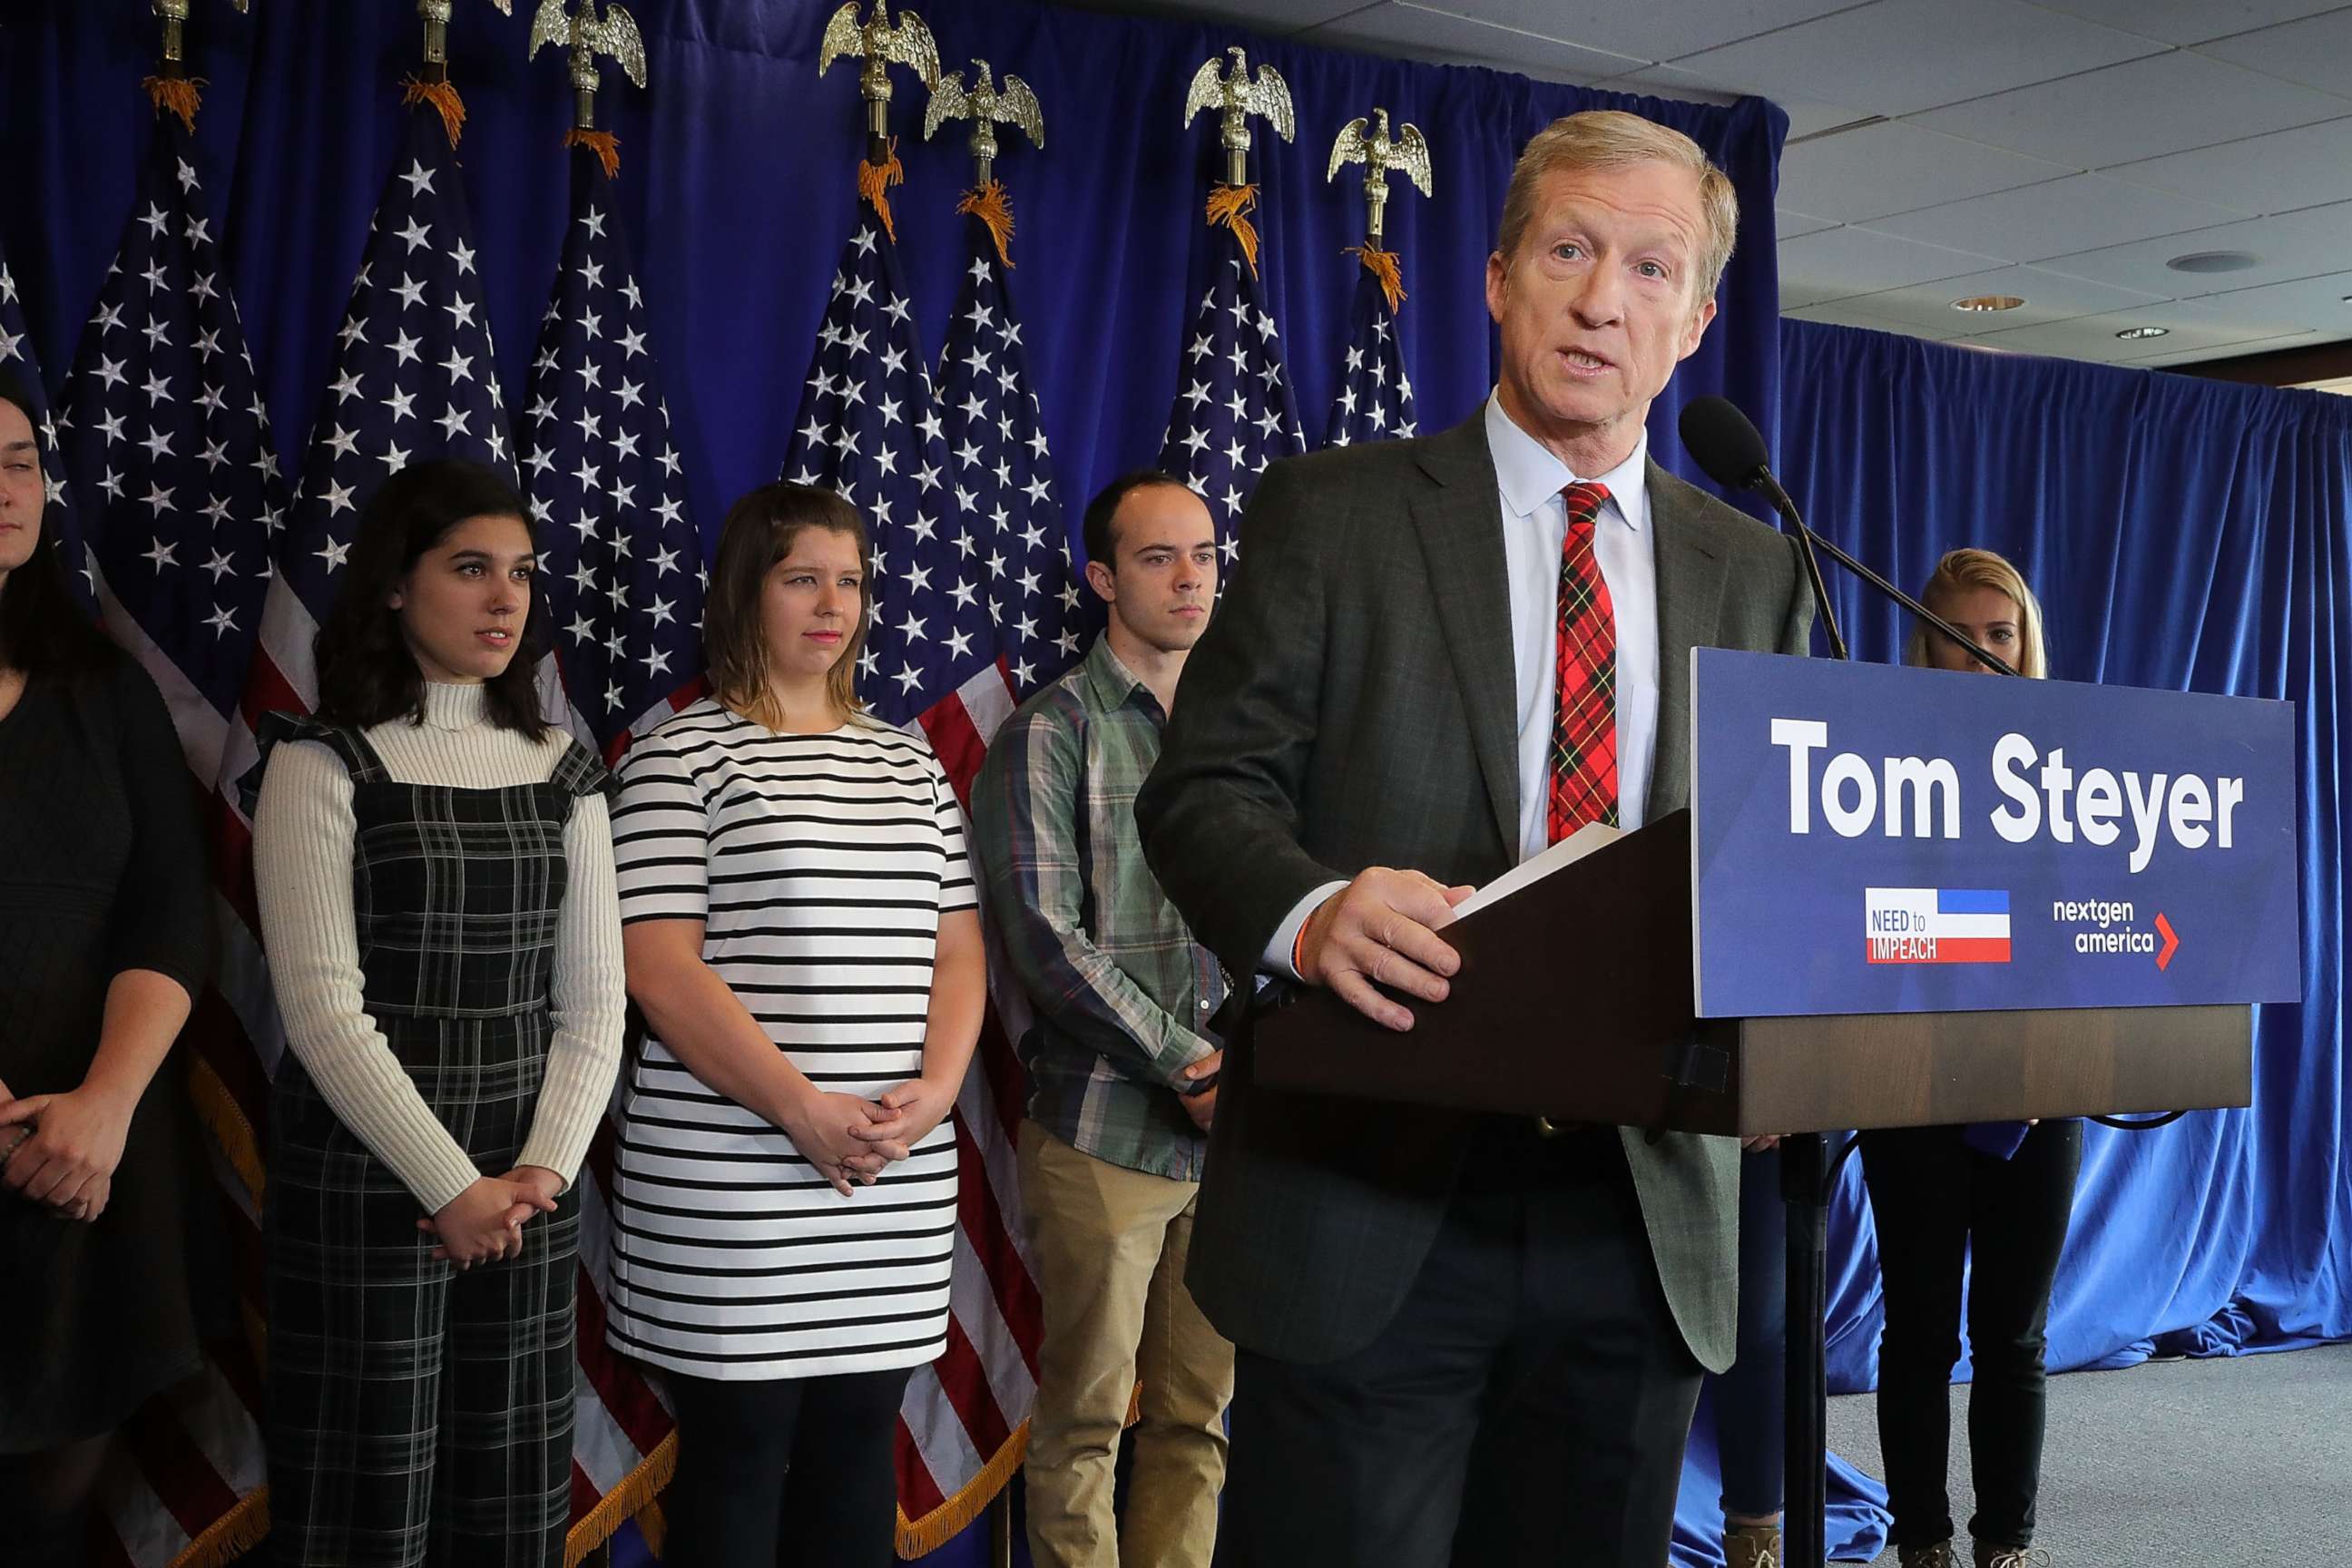 PHOTO: Hedge fund billionaire, Democratic mega-donor, and environmentalist Tom Steyer holds a news conference regarding his political future and plans Jan. 8, 2018, in Washington, DC.